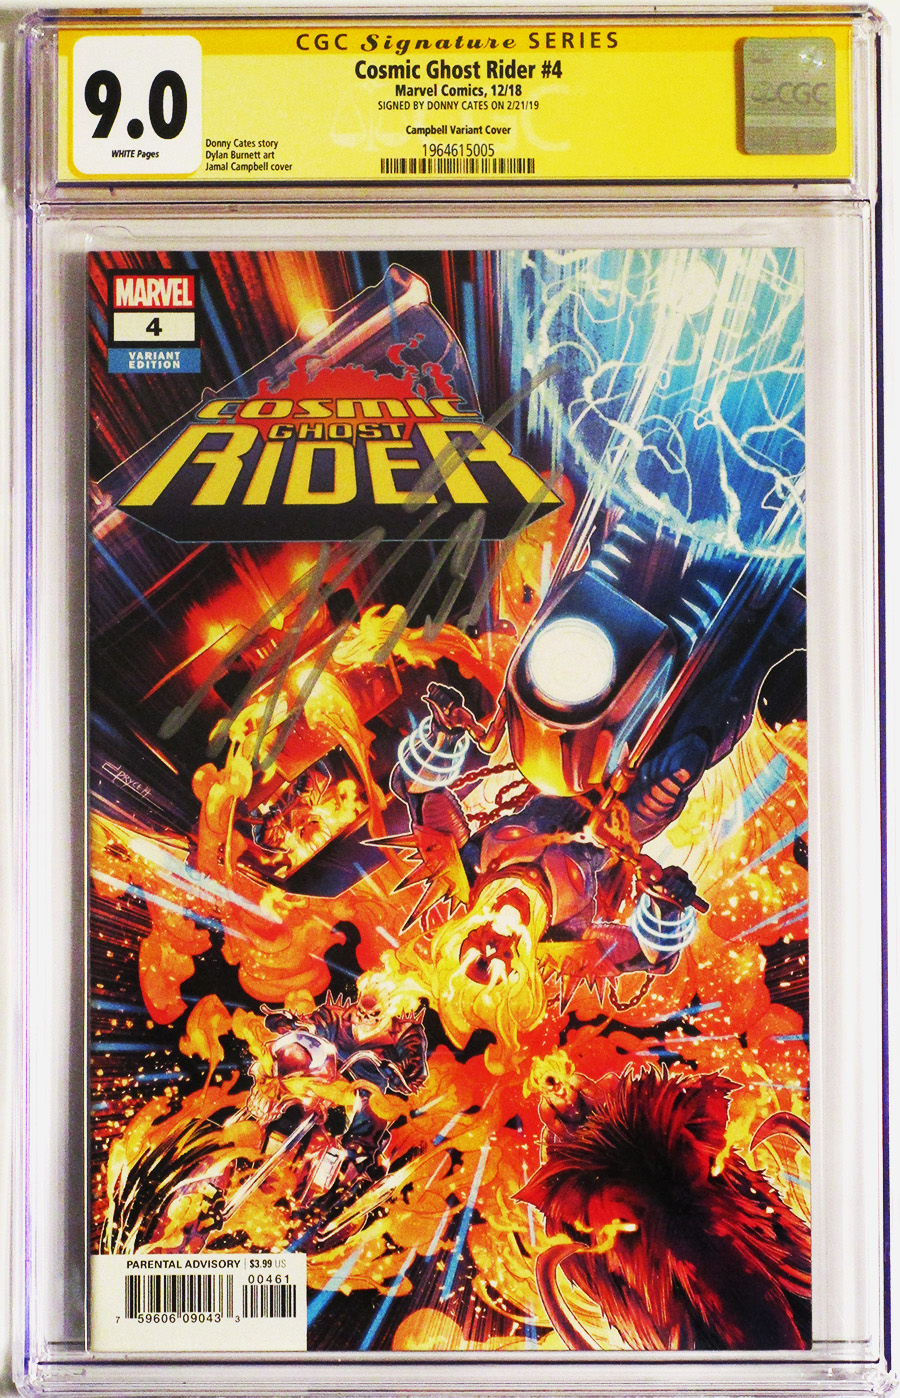 Cosmic Ghost Rider #4 Cover E Jamal Campbell Variant CGC Signature Series 9.0 Signed by Donny Cates